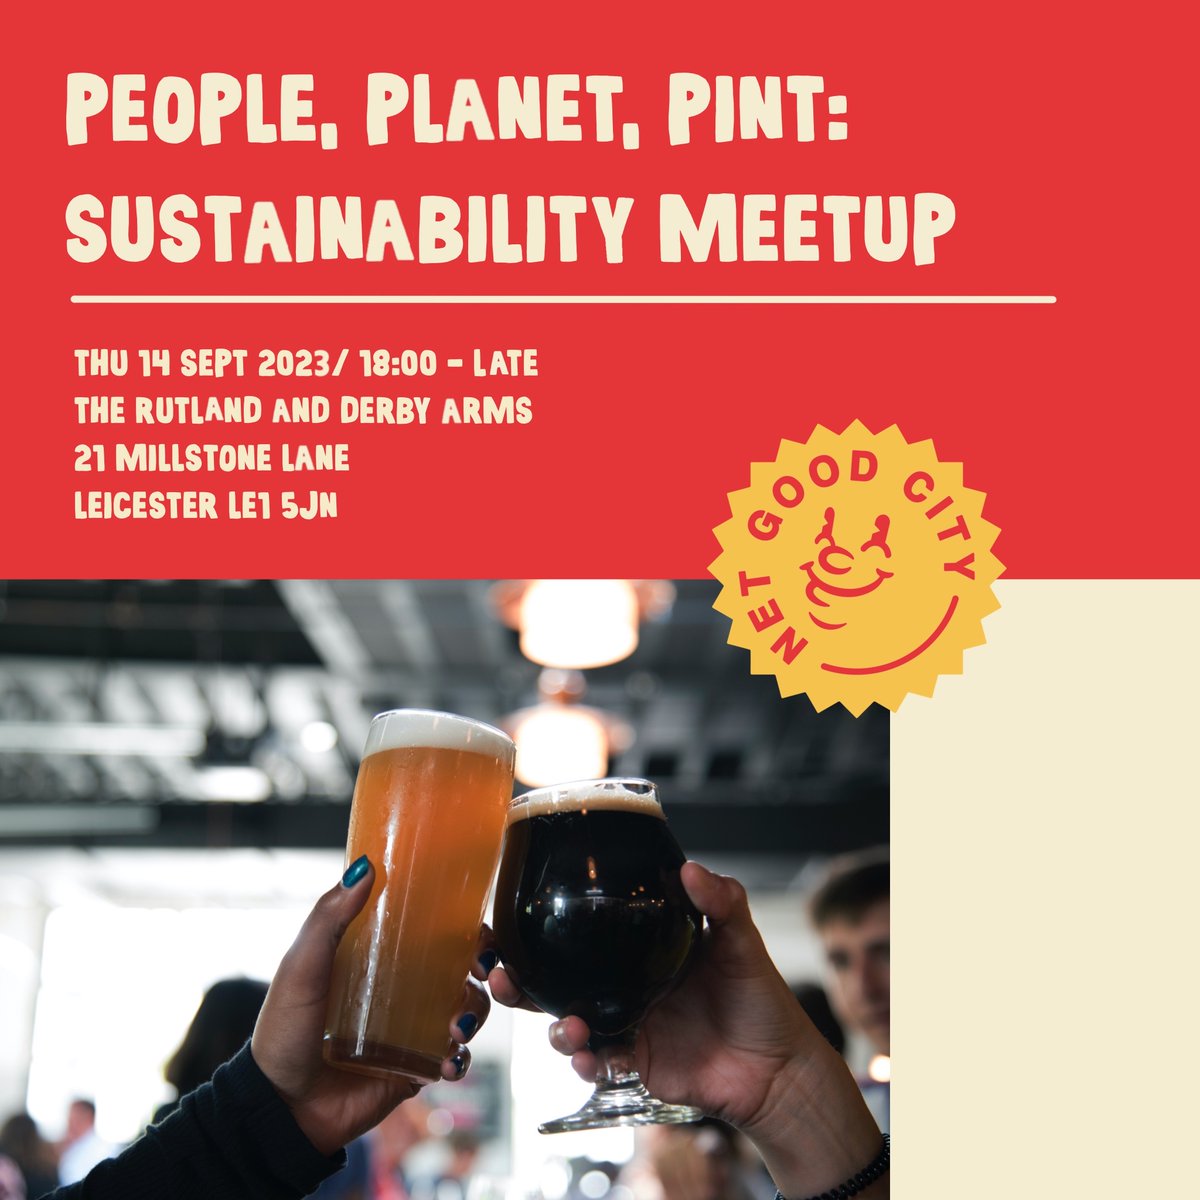 Are you a good human who likes a good pint?

This Thursday will see the return of #PeoplePlanetPint, a casual, social meet-up for those interested in #netzero, #BCorp and environmental progress. Get down to @RutlandAndDerby and meet some excellent people🍻

#netgoodcity